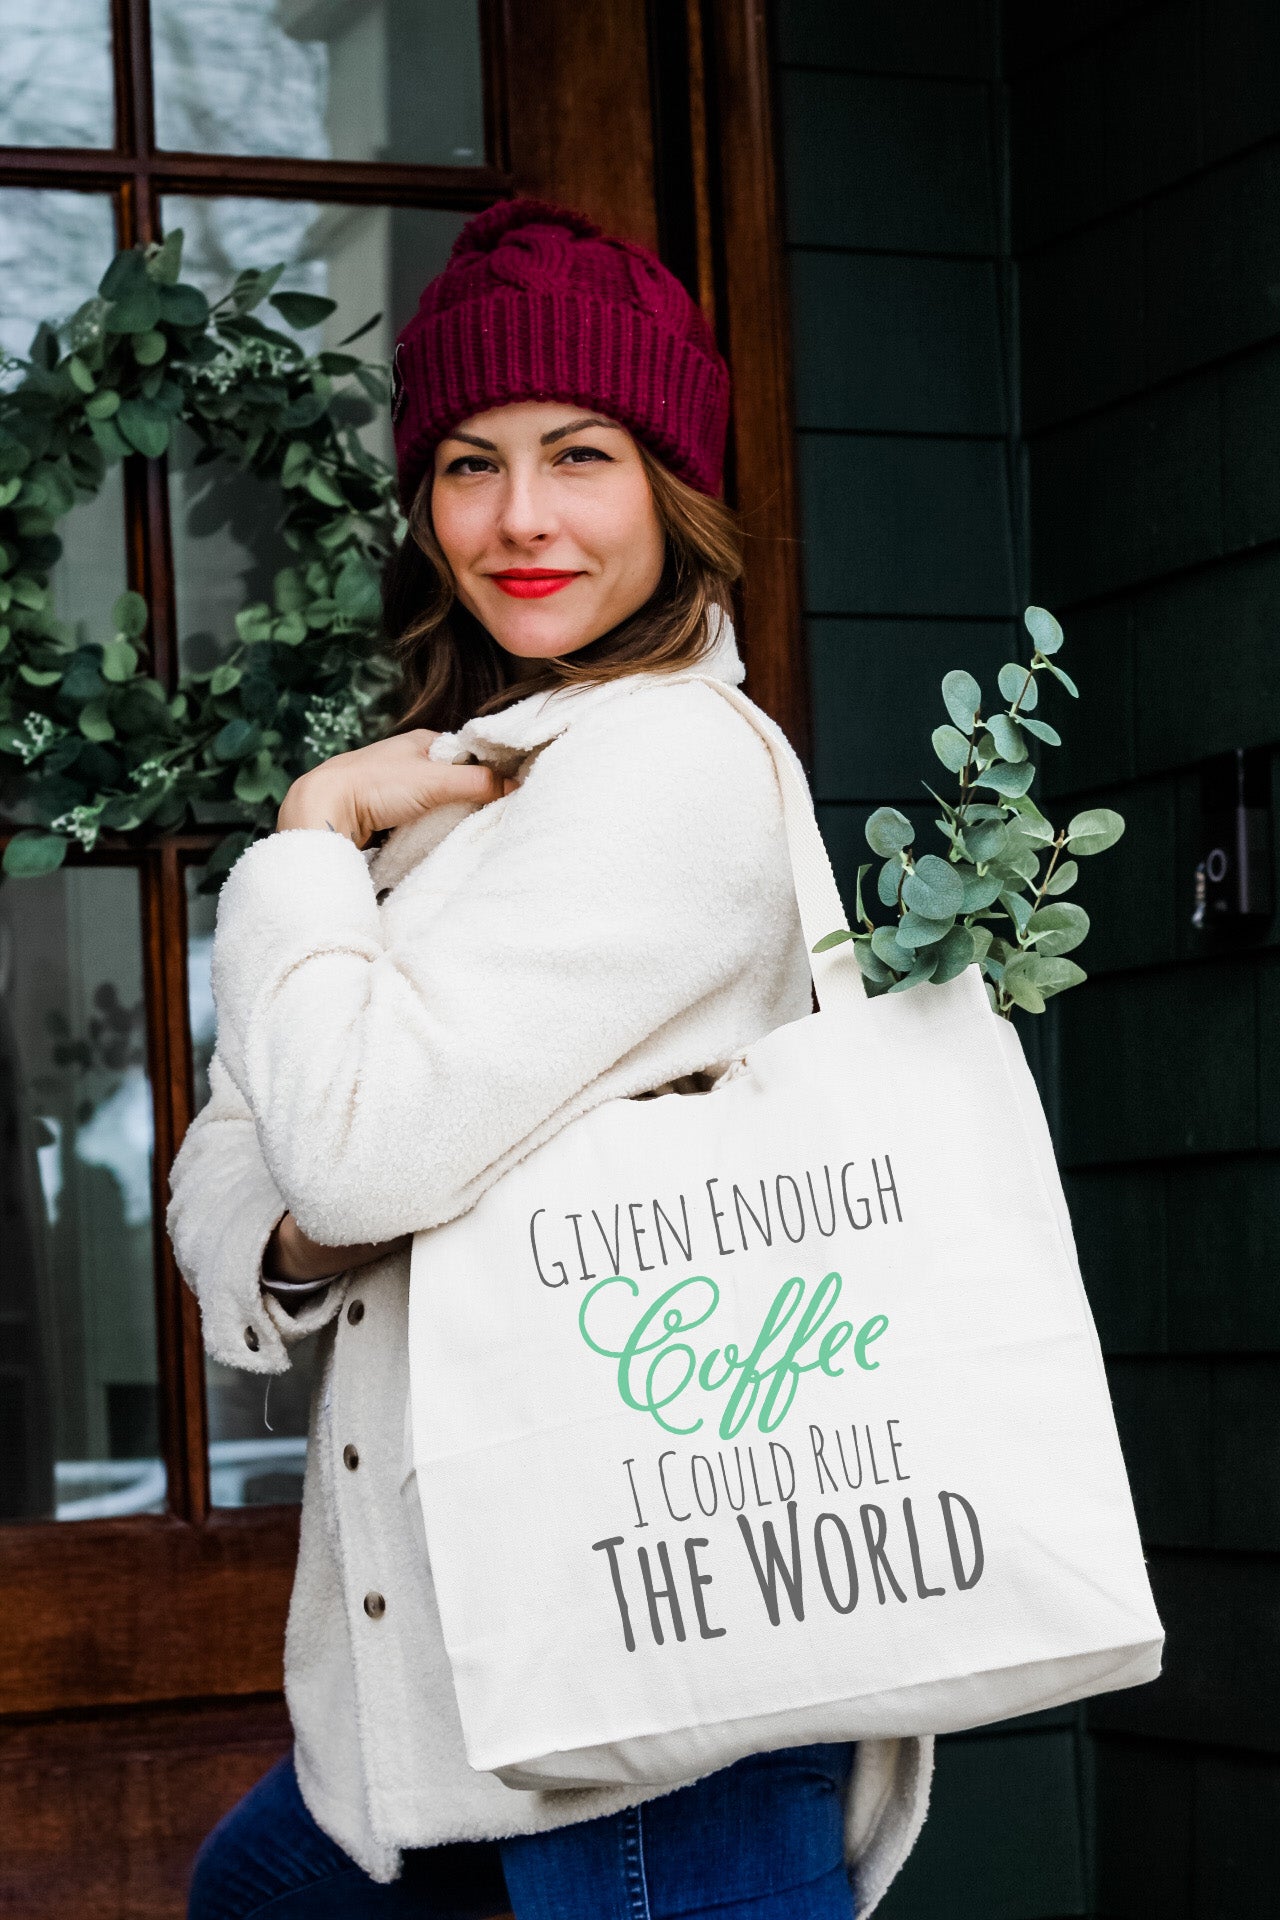 a woman carrying a bag that says given enough coffee could kill the world